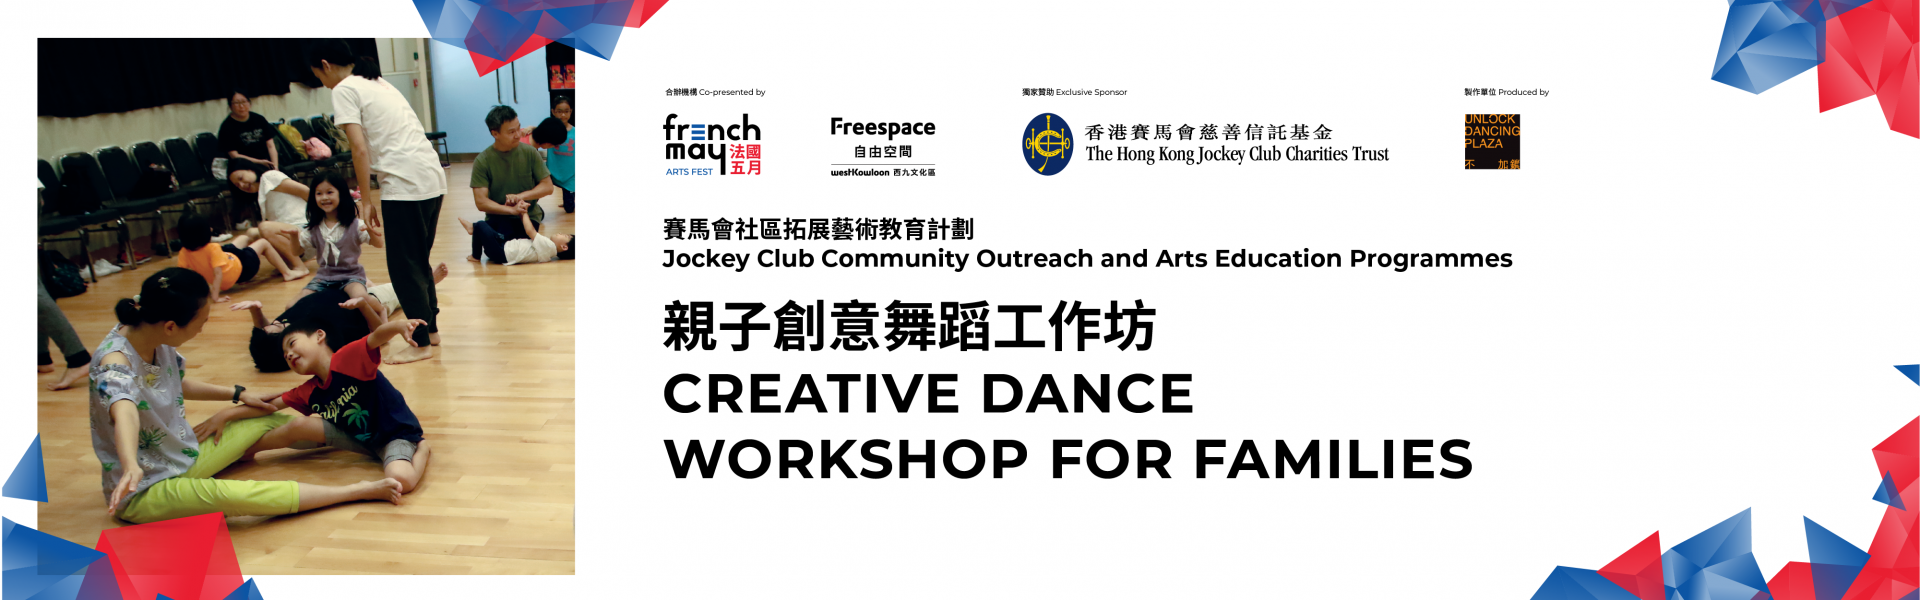 Creative Dance Workshop for Families